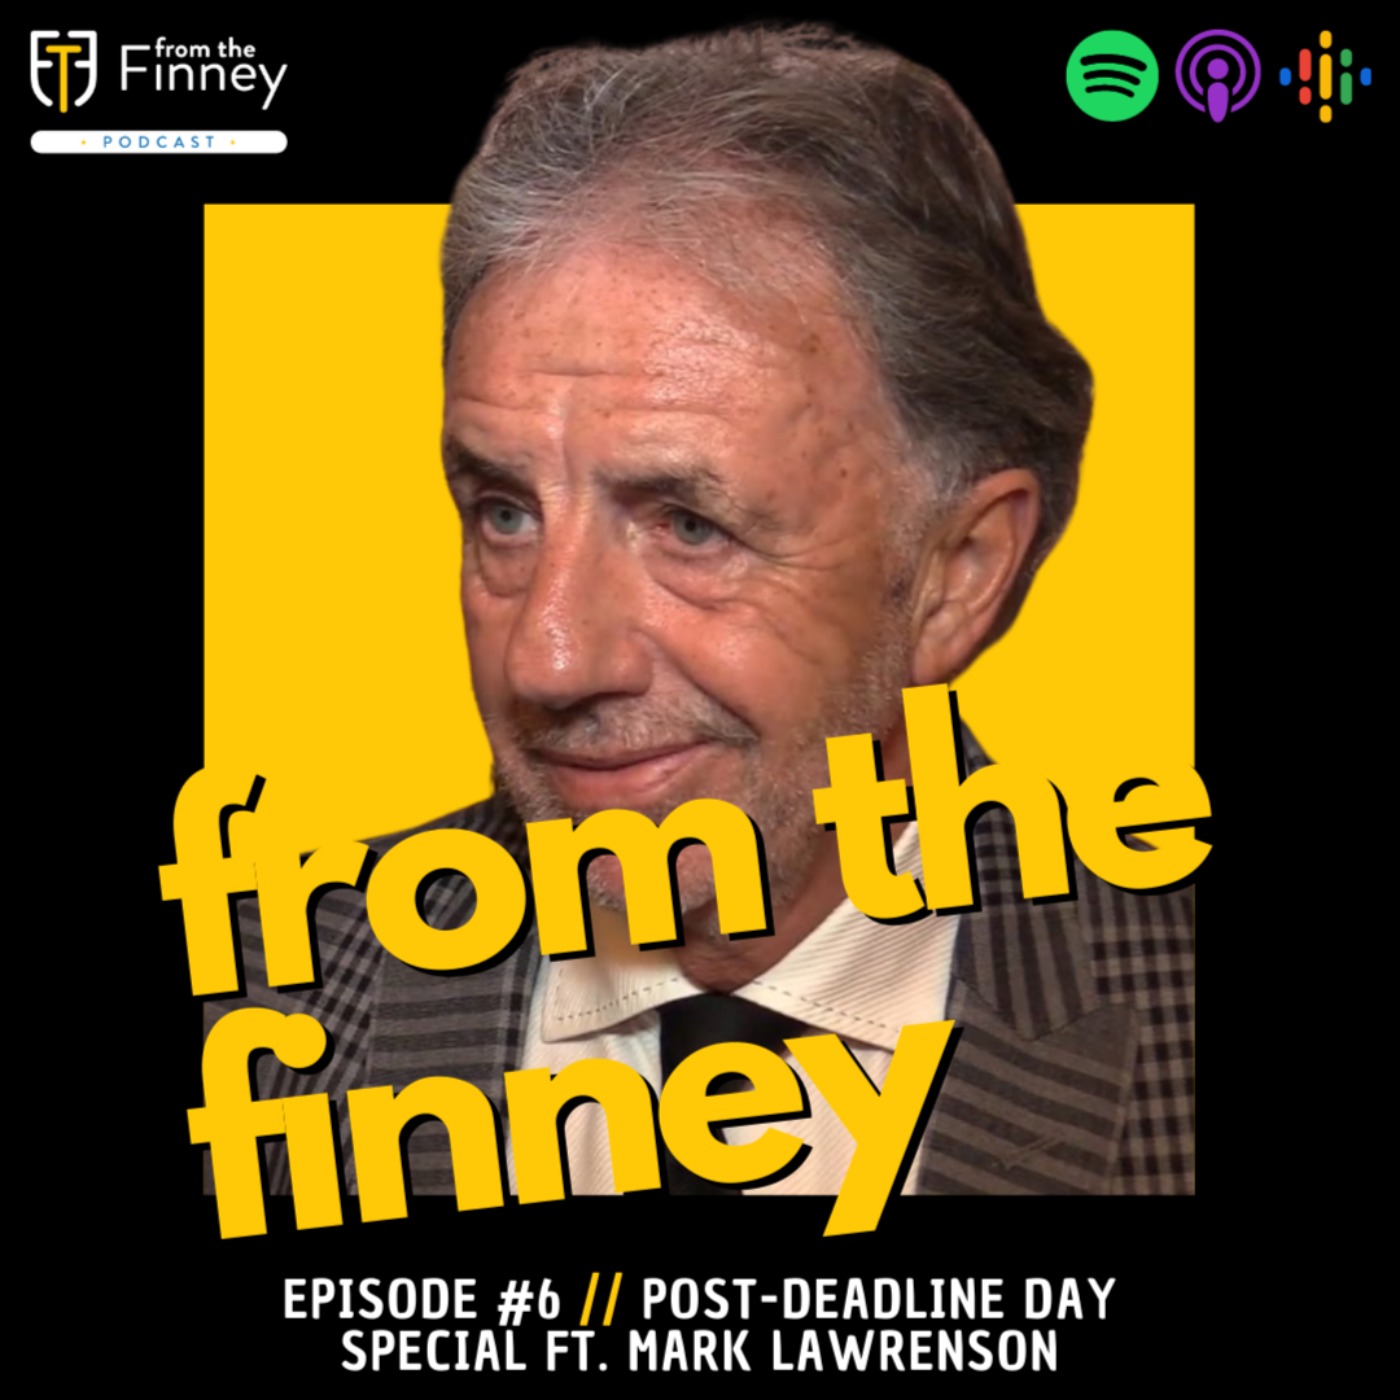 Episode #6 // Post-Deadline Day Special // From the Finney Podcast